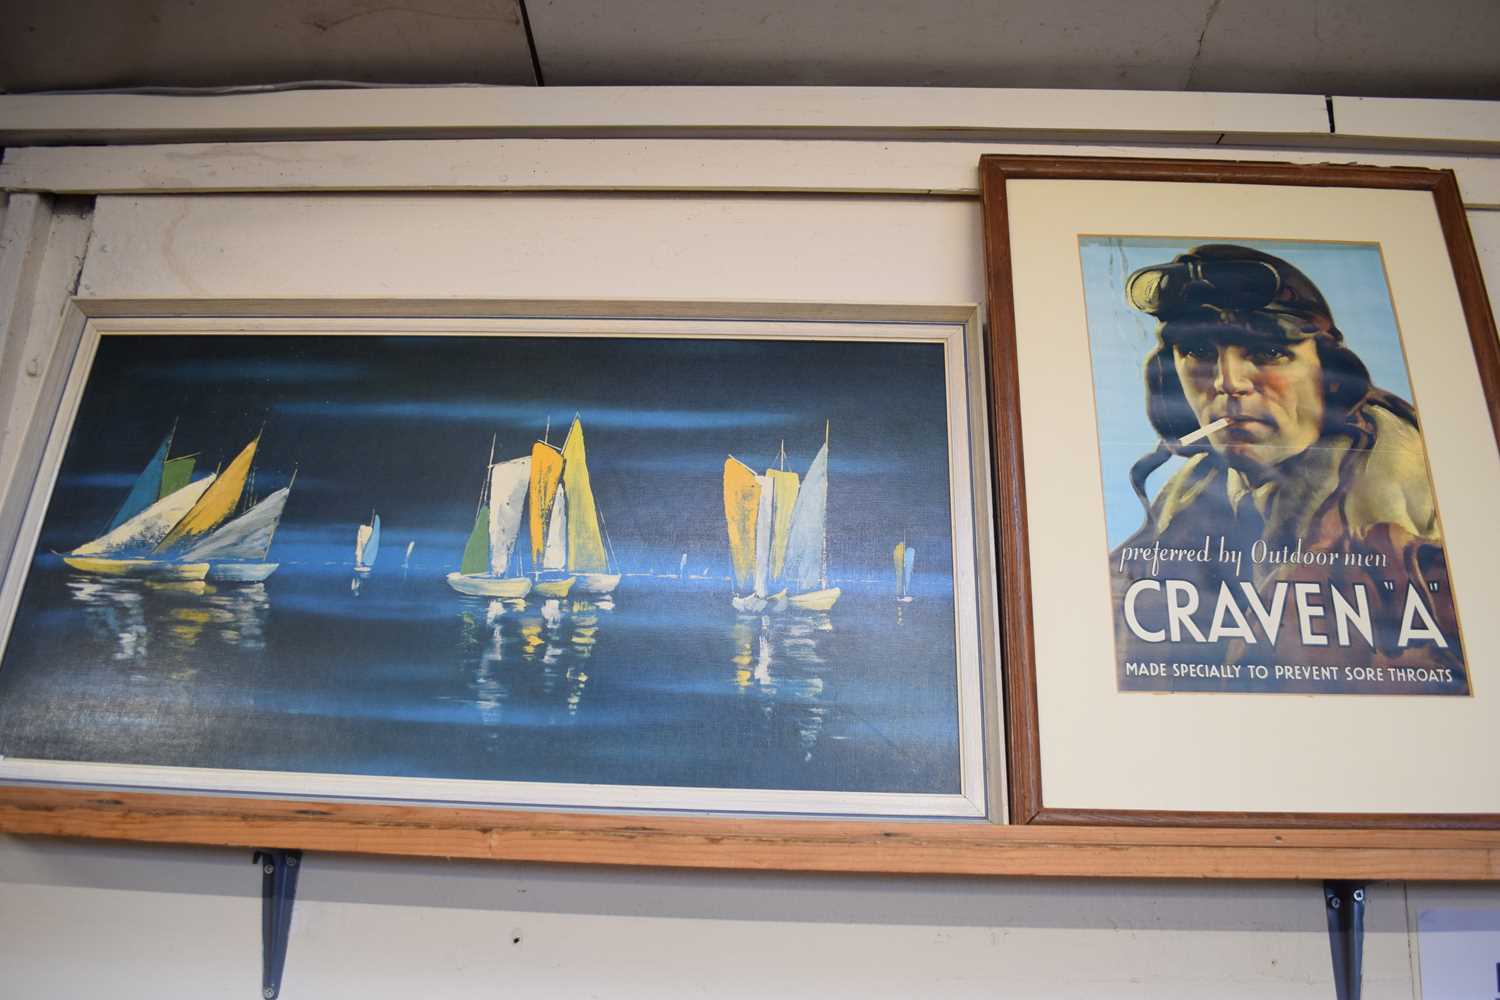 CRAVEN A CIGARETTE ADVERTISING PRINT, FRAMED, TOGETHER WITH A FURTHER ABSTRACT STUDY OF BOATS IN